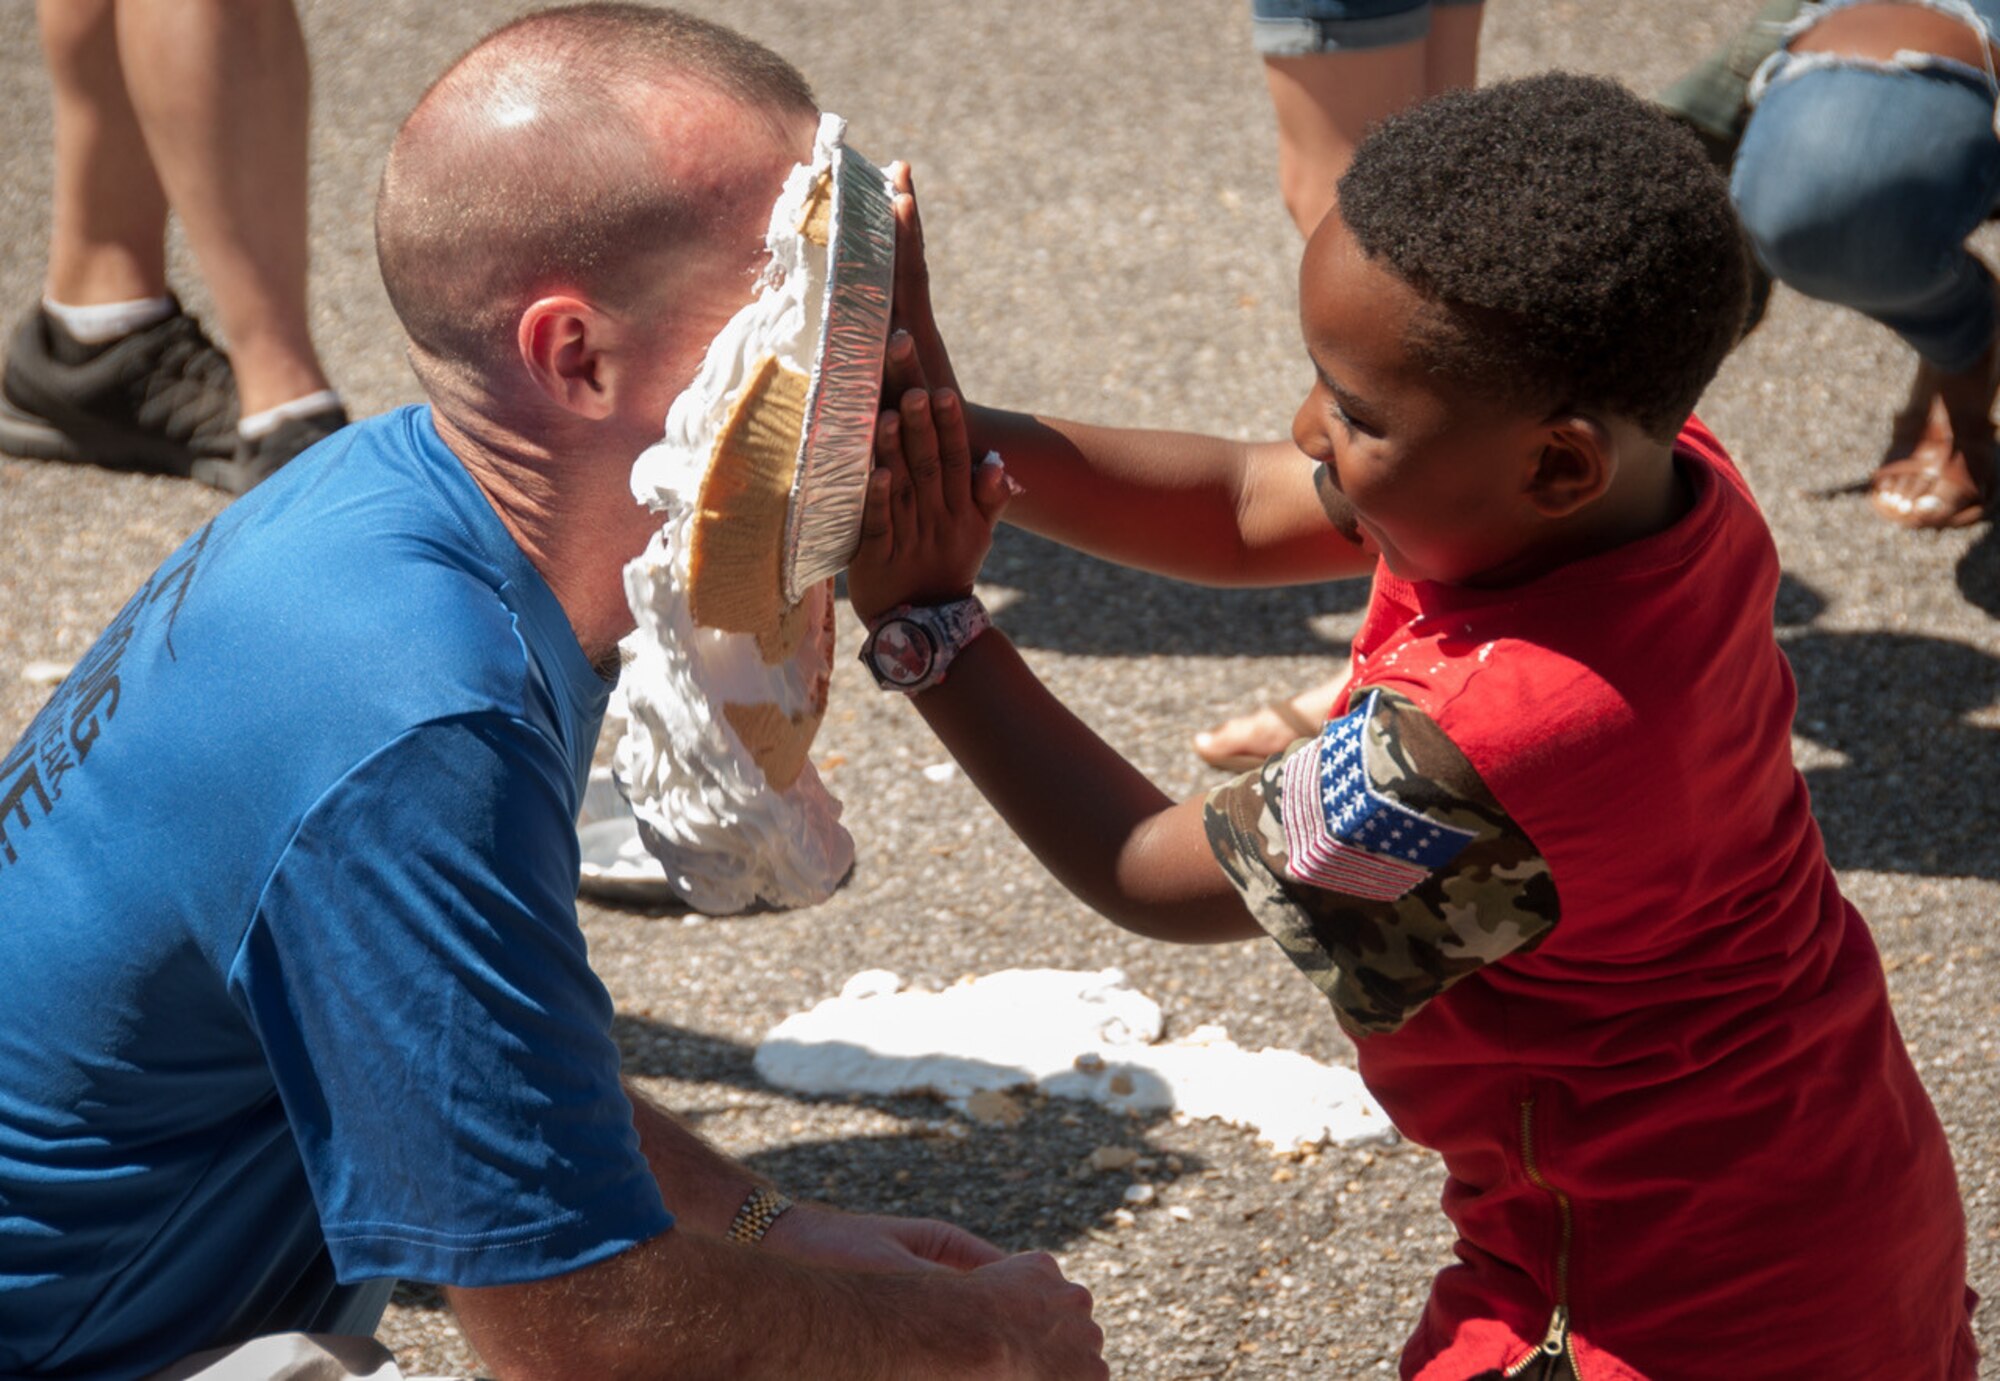 Tyler Ingel, 403rd Wing family member pies Col. Chad Segura, 403rd Mission Support Group commander, in the face during the annual 403rd Wing Airman and Family Day picnic May 6, 2017 at Keesler Air Force Base, Mississippi. (U.S. Air Force photo/Staff Sgt. Shelton Sherrill) 